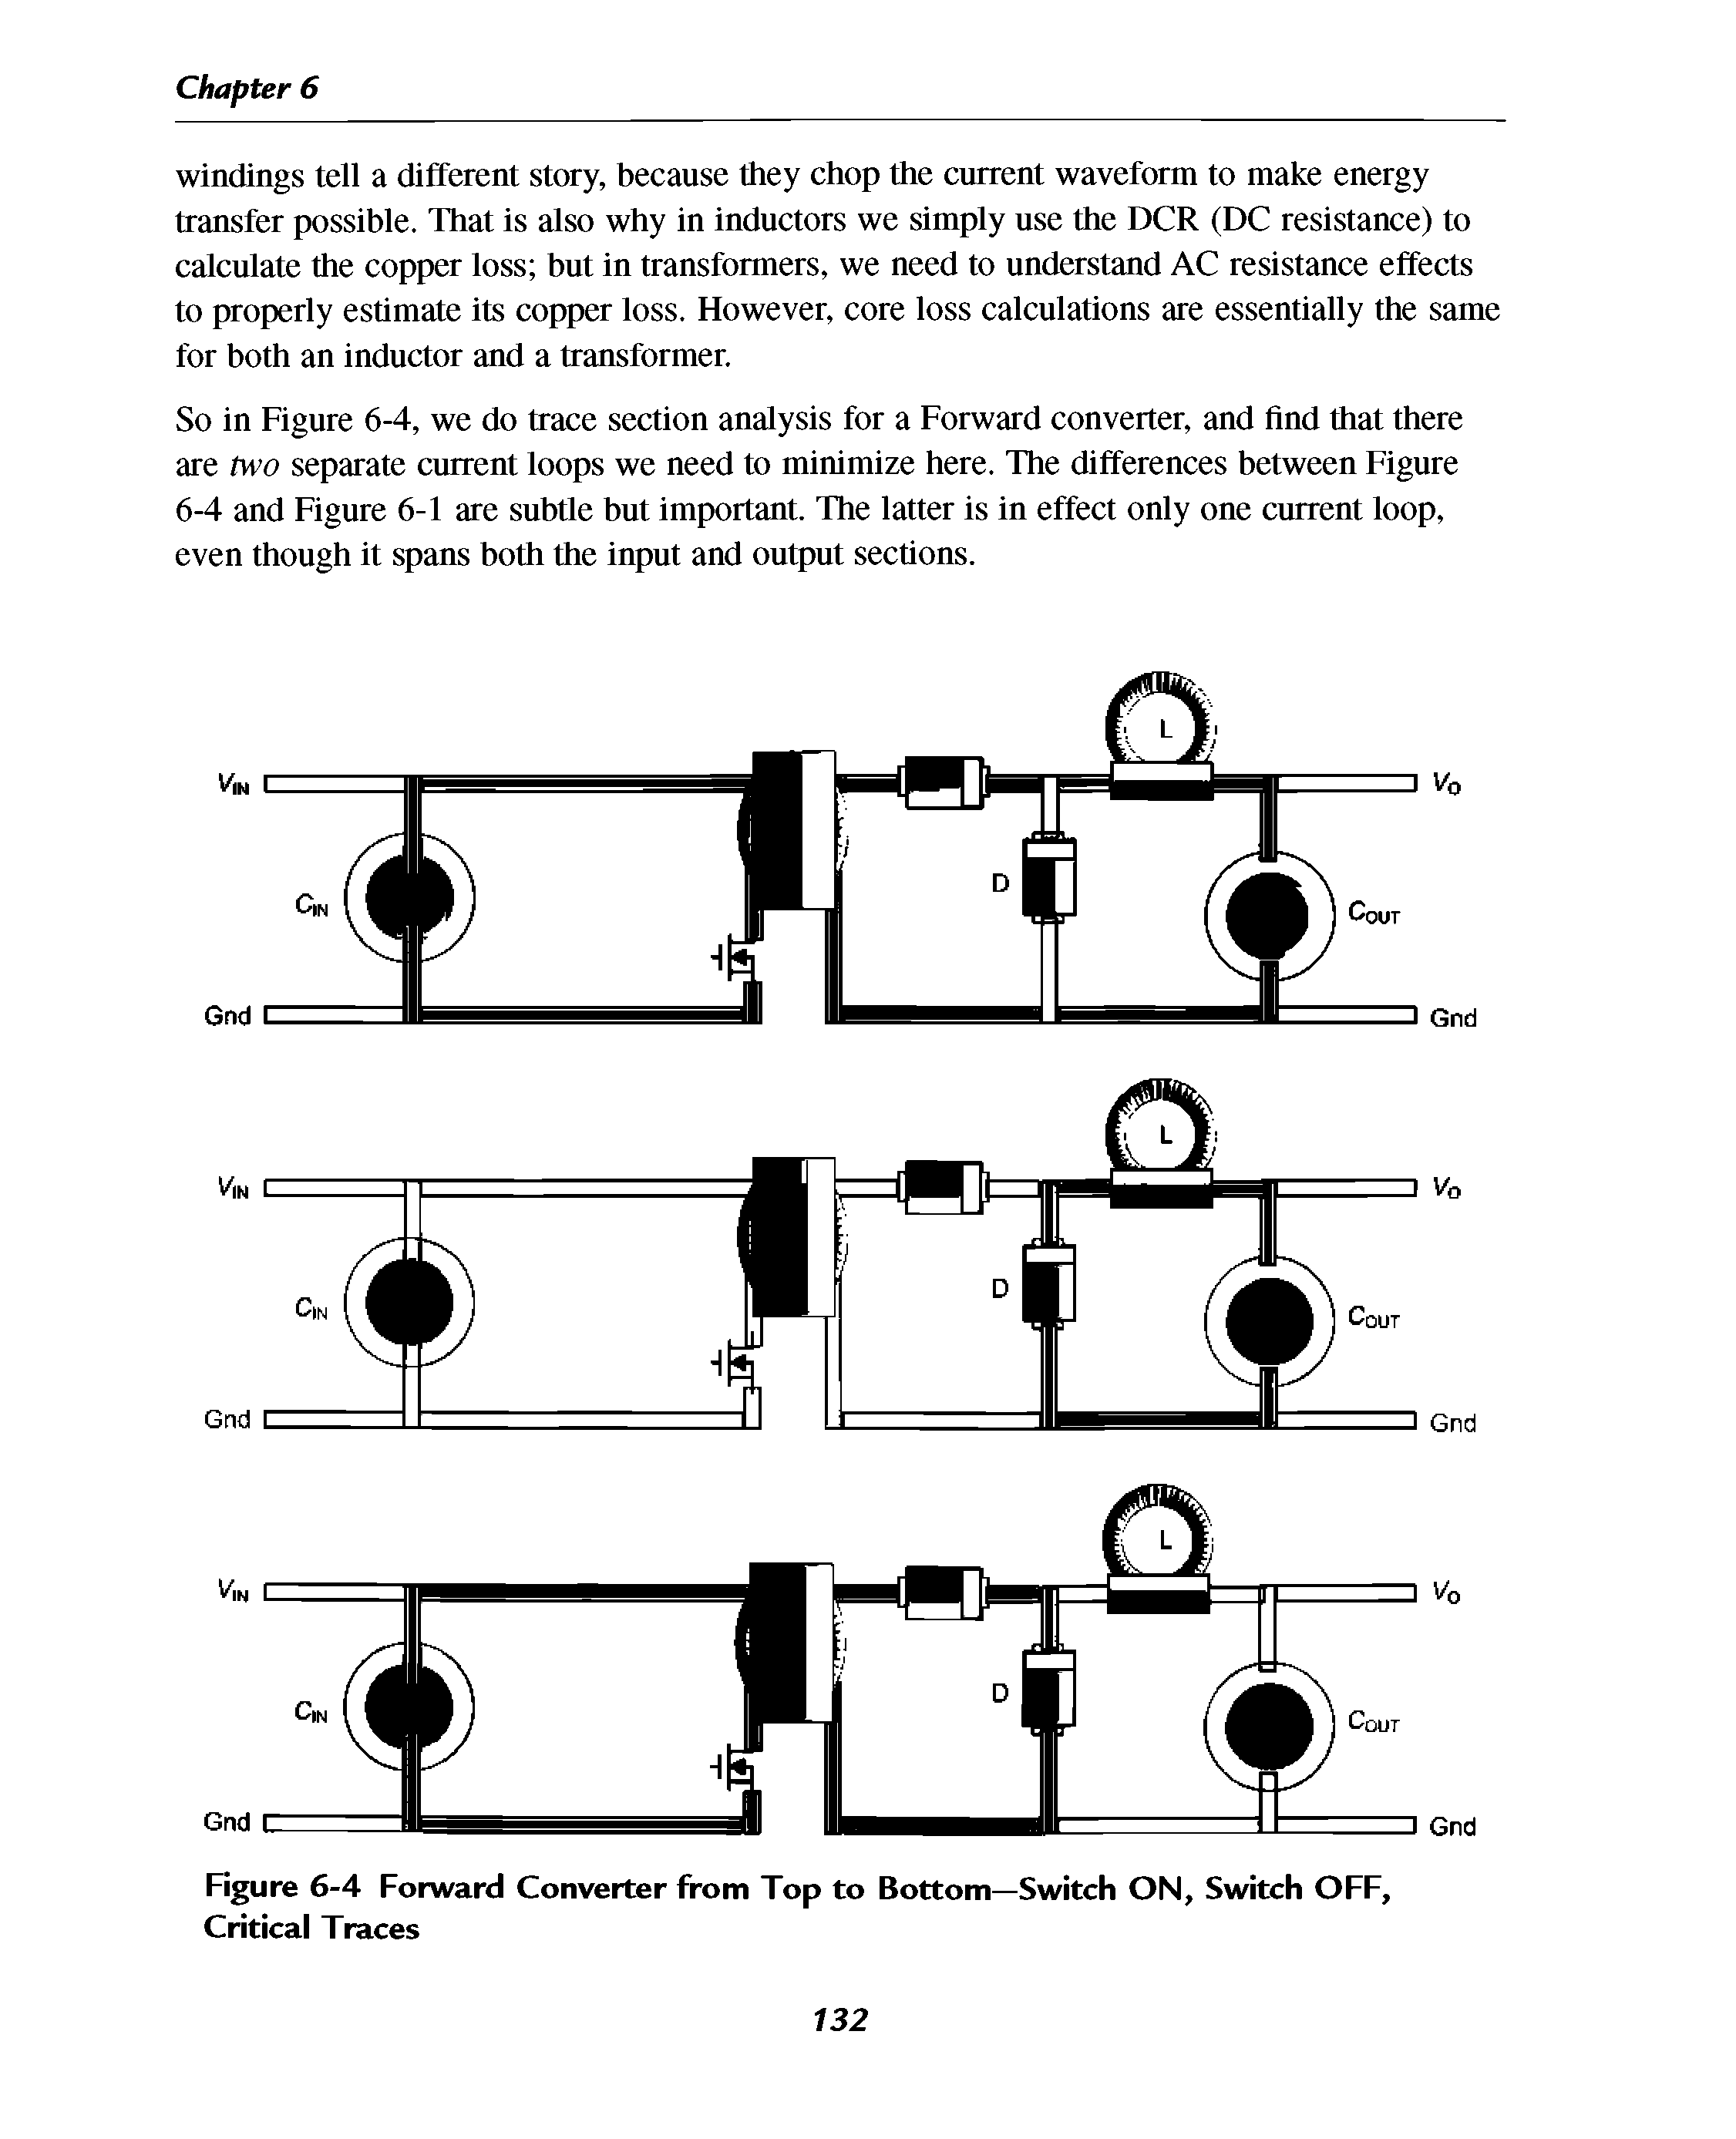 Figure 6-4 Forward Converter from Top to Bottom—Switch ON, Switch OFF, Critical Traces...